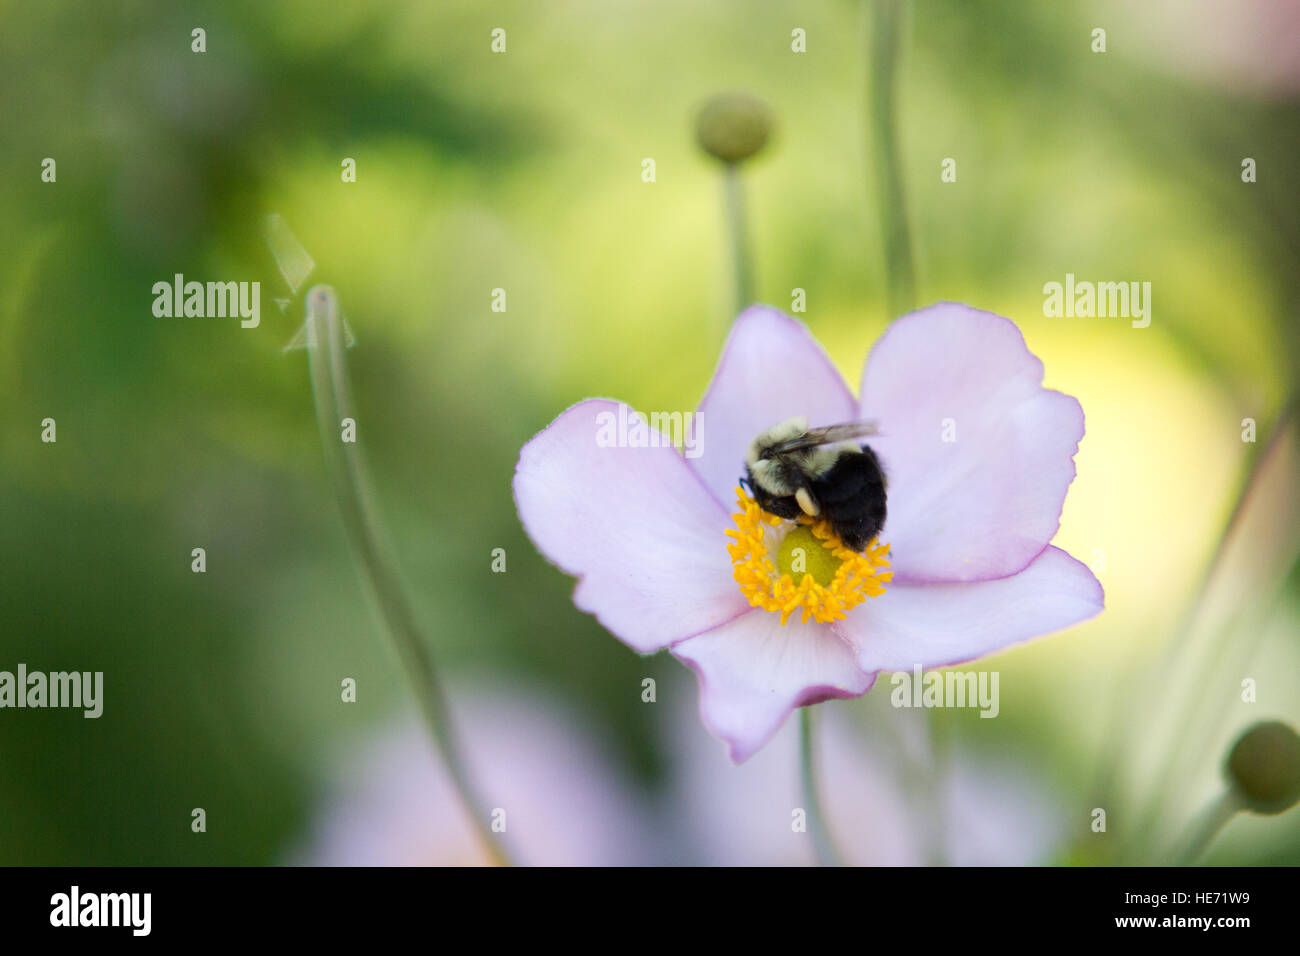 Bumble bee on a pink anemone flower bud Stock Photo